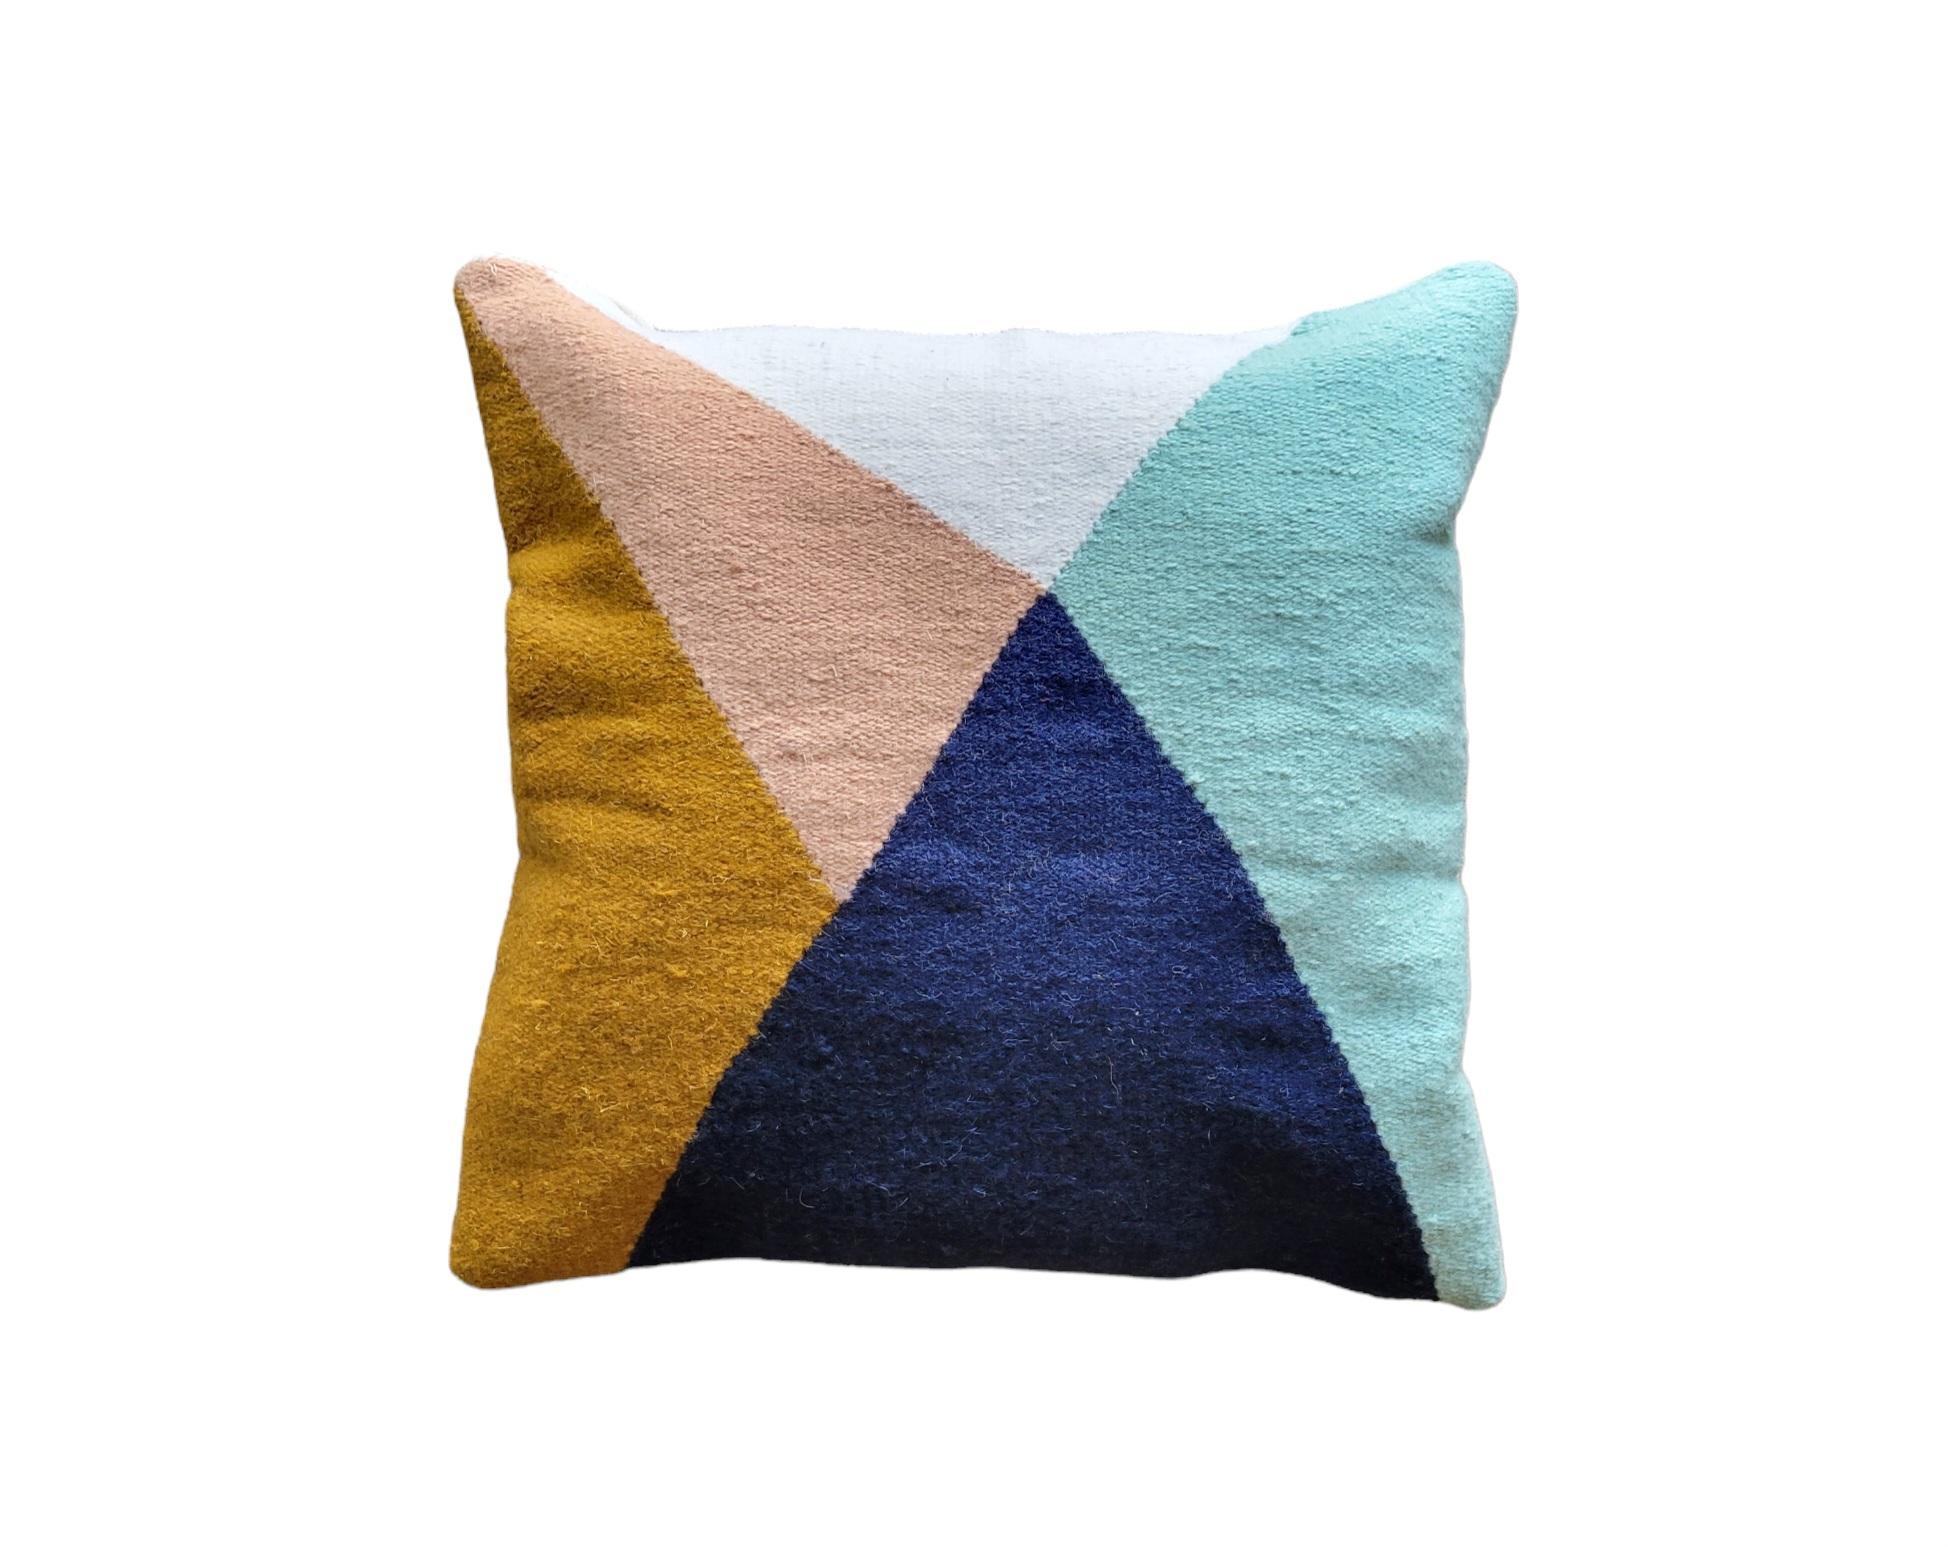 Egyptian Vera Colorful Handwoven Throw Pillow Cover For Sale